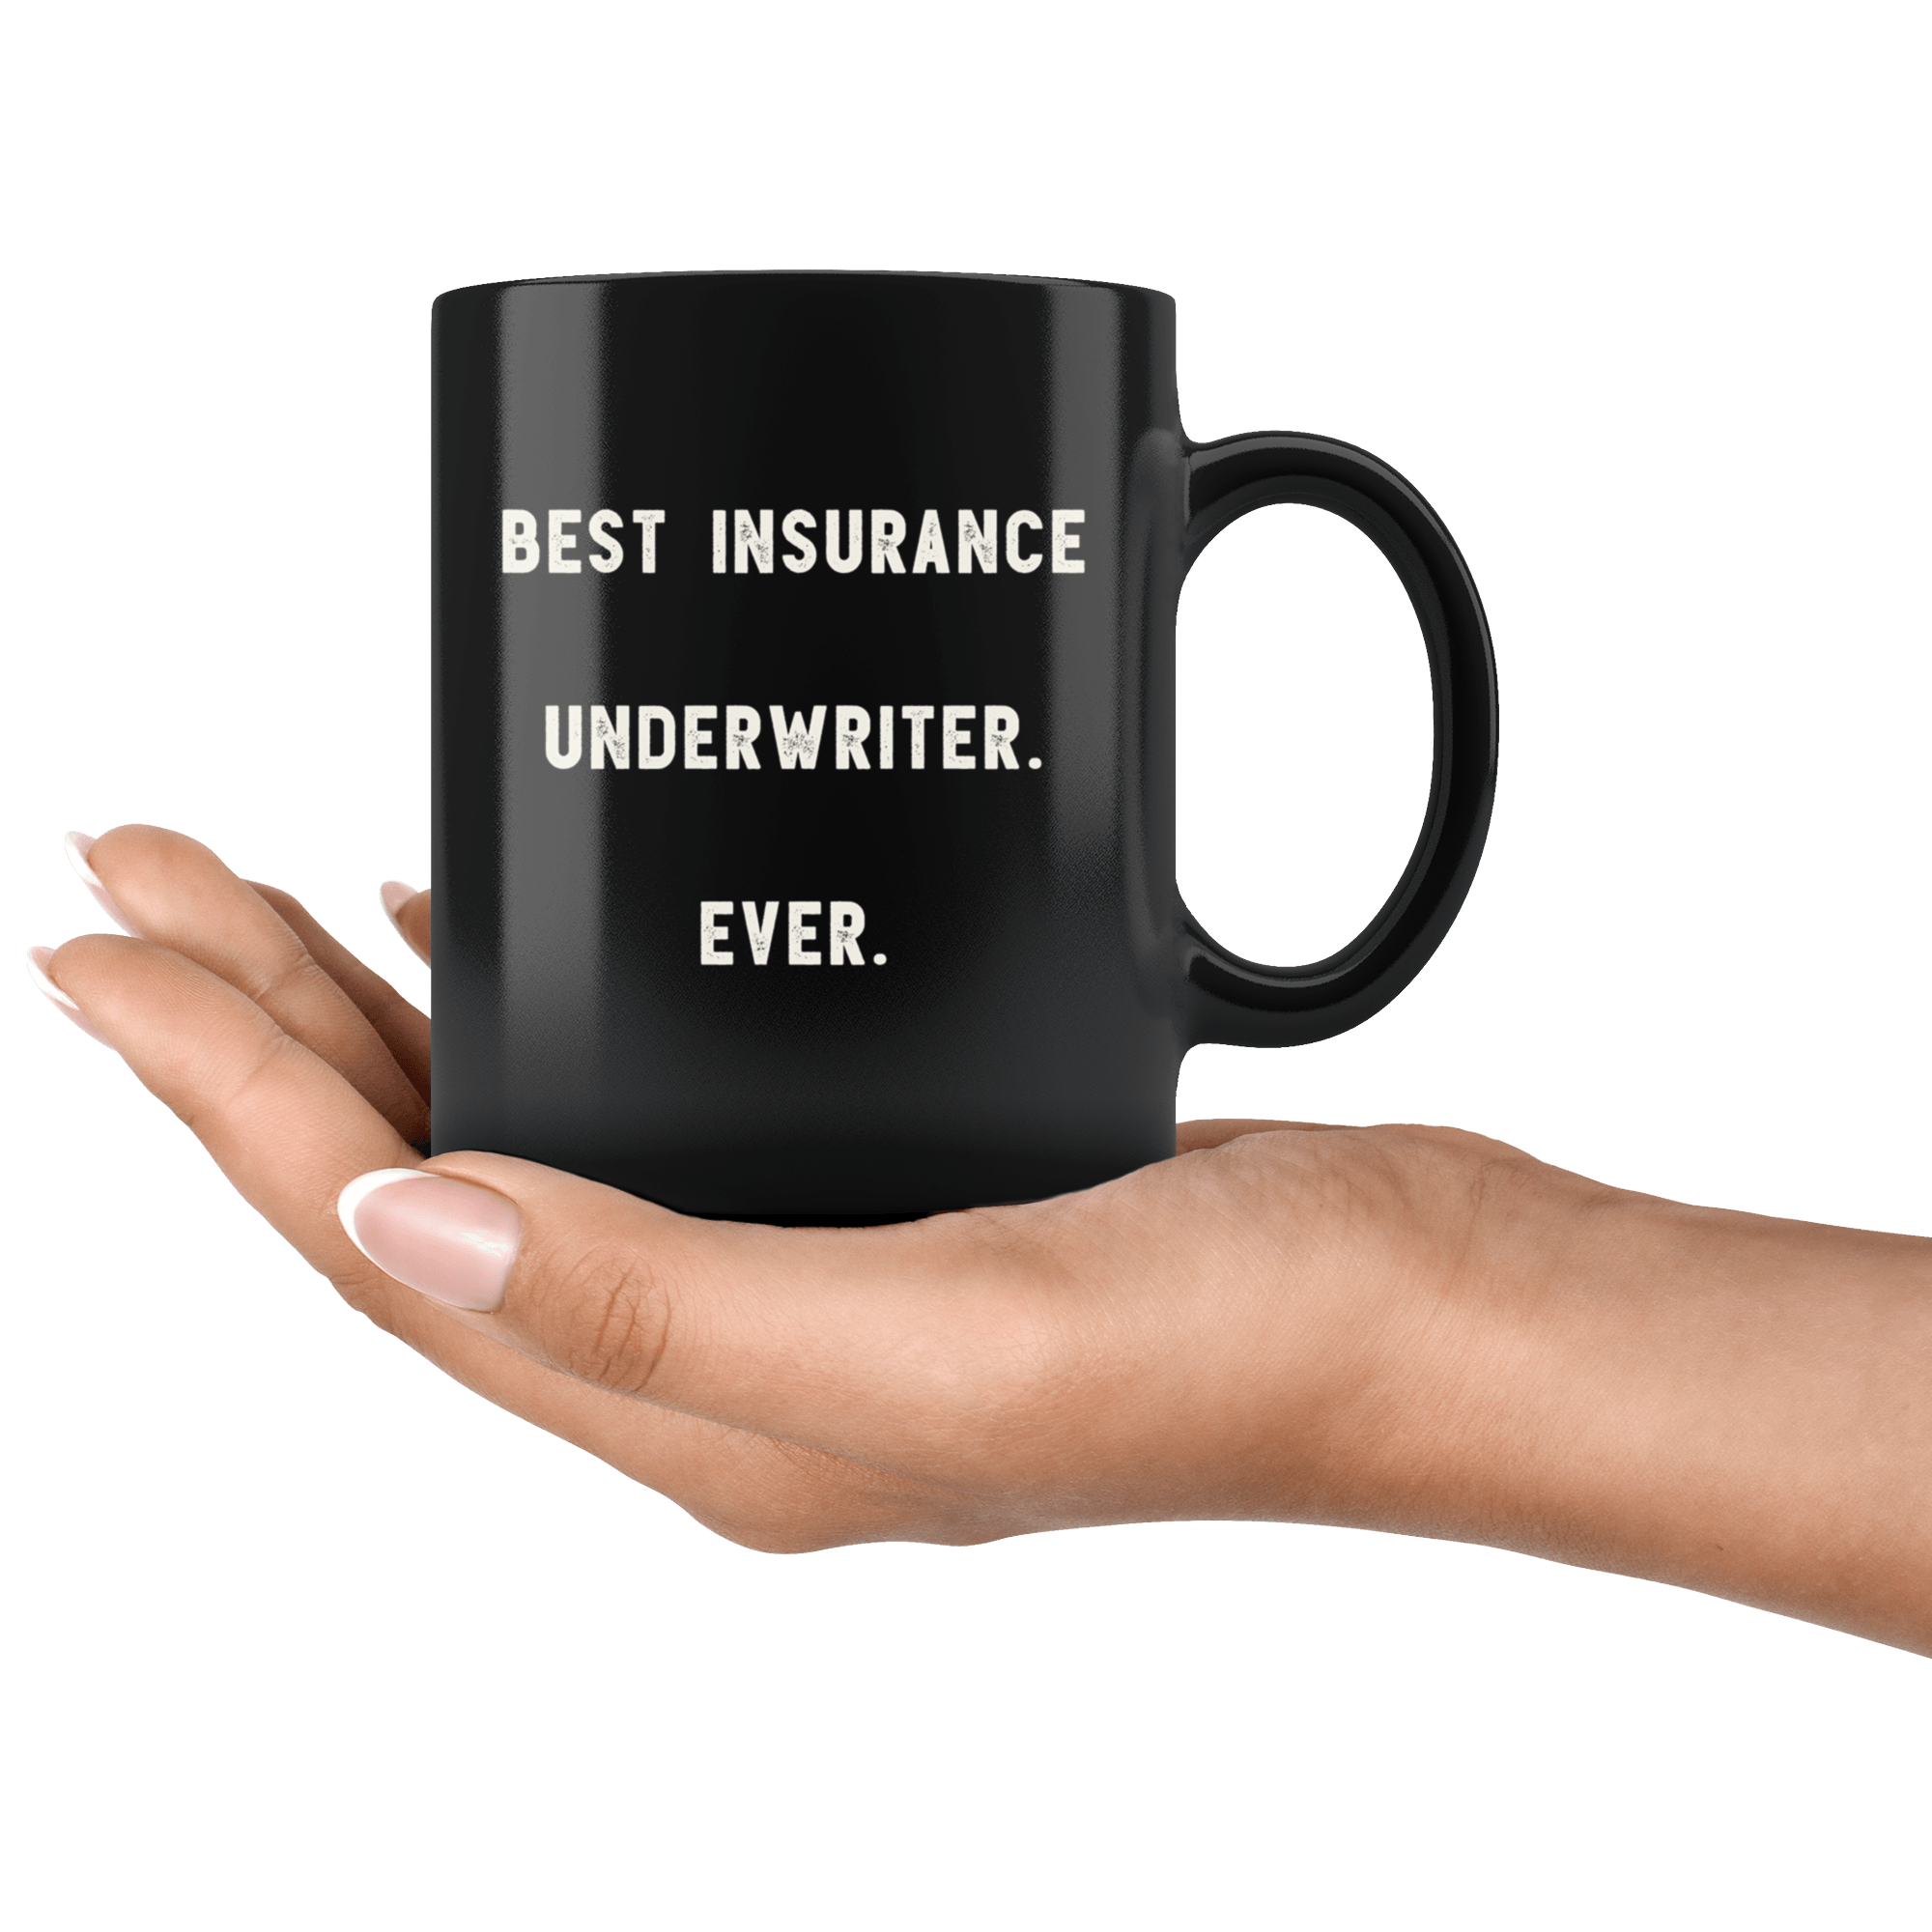  Naughty Gag Gift For Adults, Ideal For Funny Gifts - Vulgar  Insulting Gift Idea, Thought-provoking Quote For Inappropriate Gags On 11oz  15oz Black Coffee Mug : Handmade Products